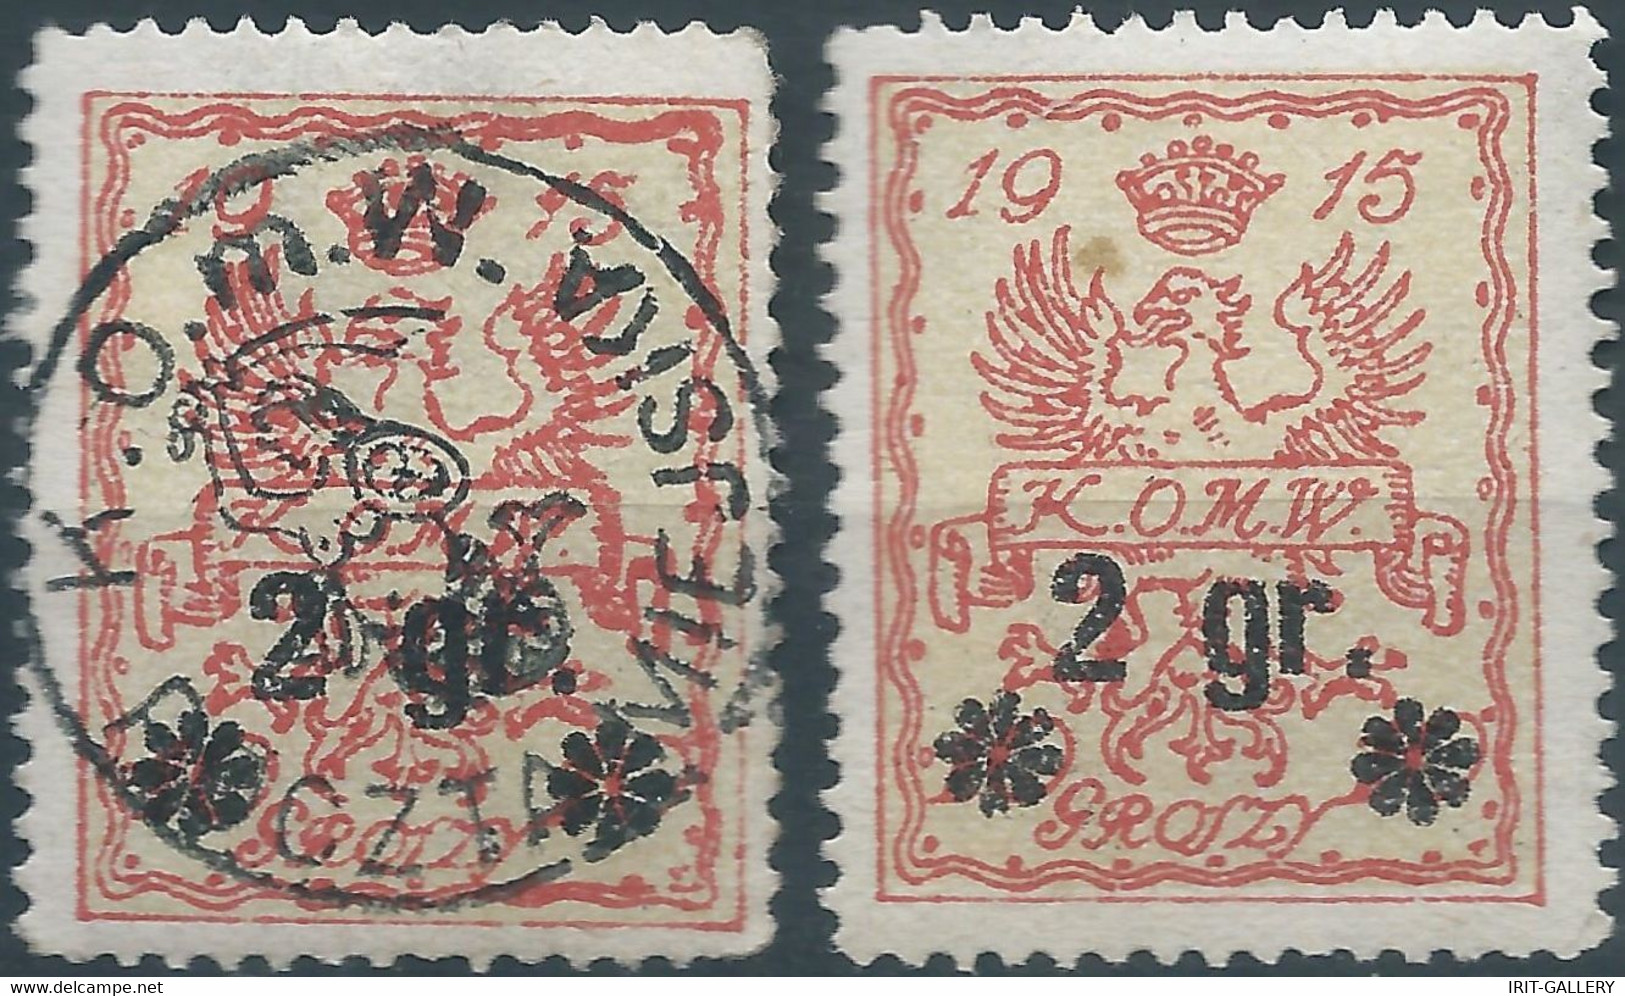 POLONIA-POLAND-POLSKA,1915 Warsaw Local Issues,10 GROSZY/ 2 GR,Obliterated And Mint - Ongebruikt